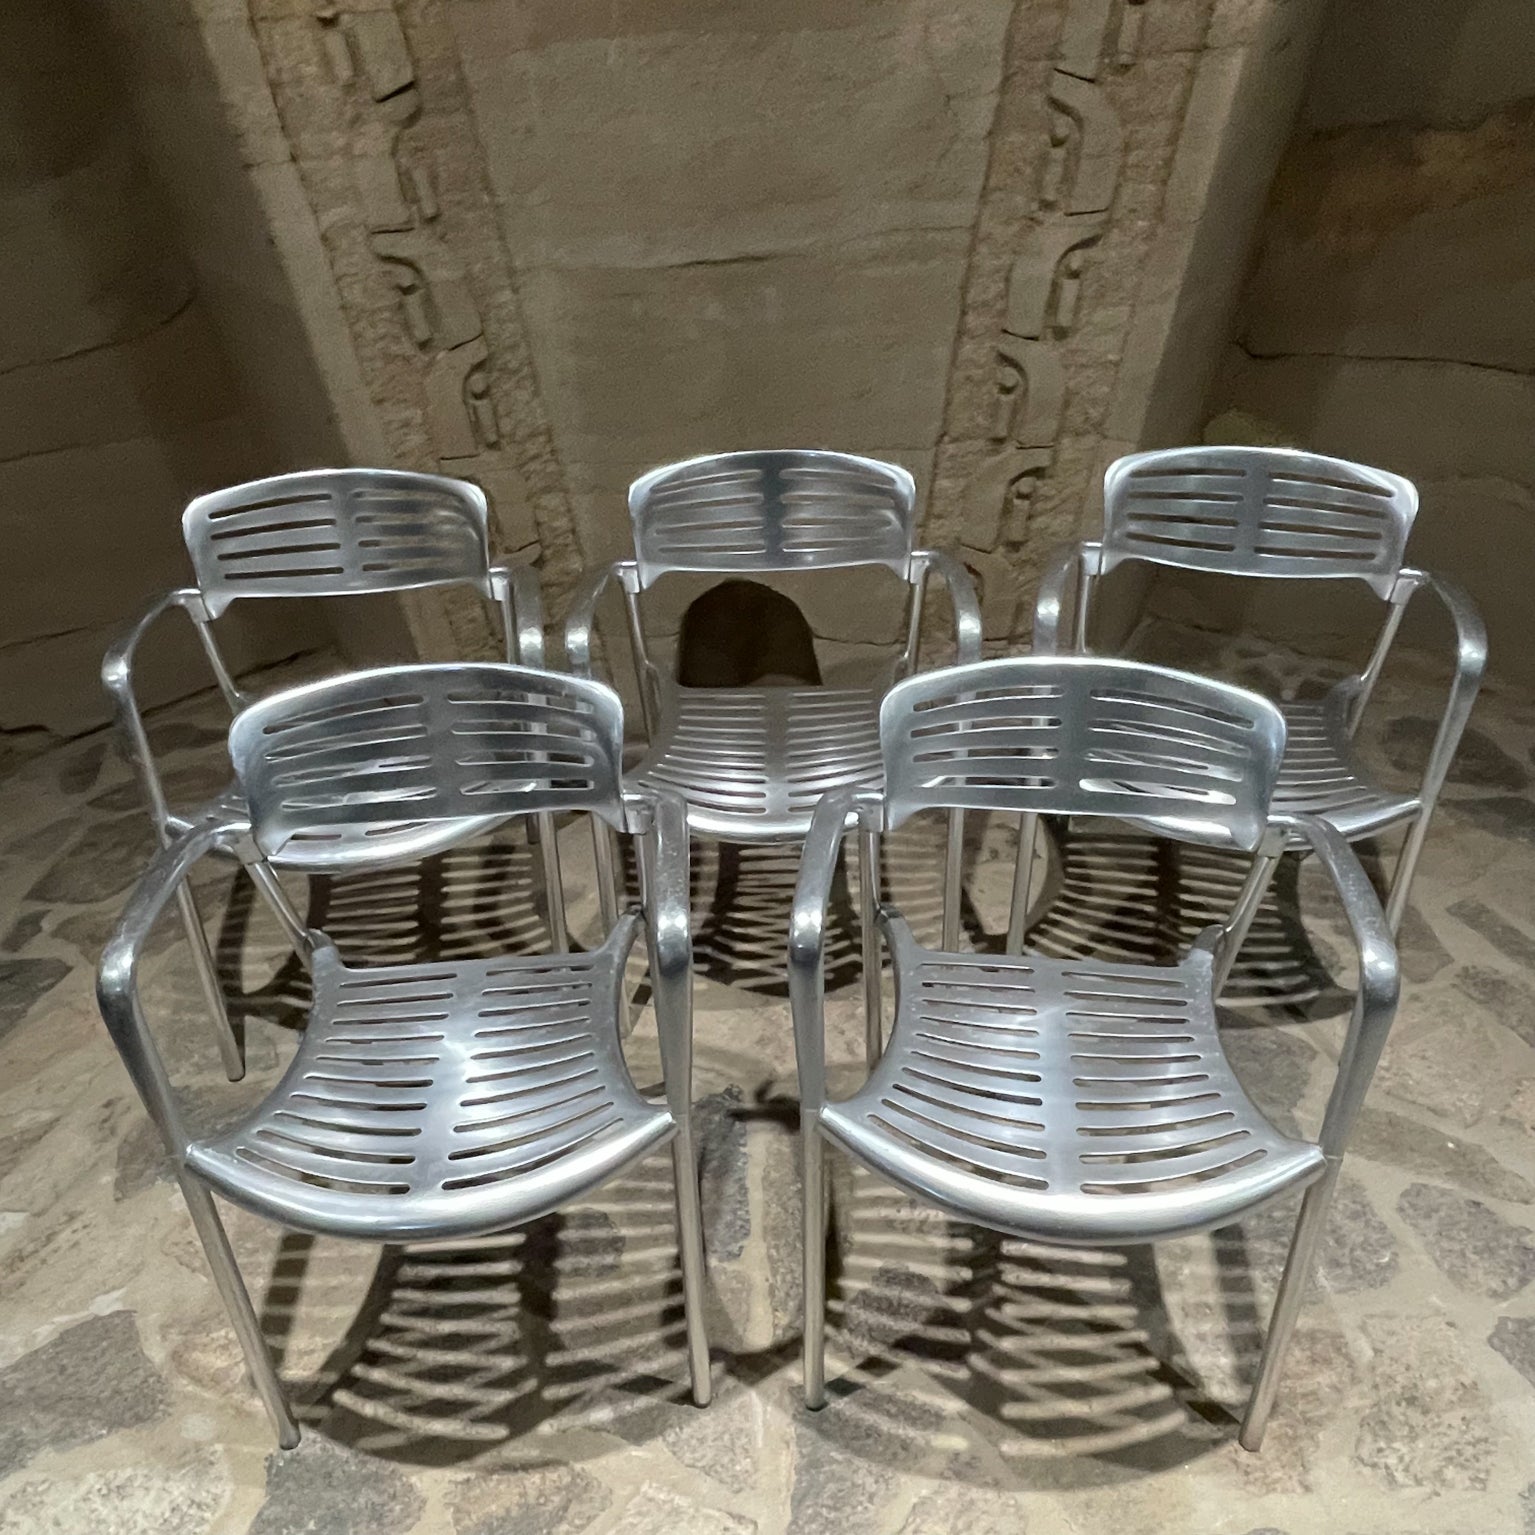 AMBIANIC presents
Contemporary Modernist 1980s Set of 5 Iconic Toledo Stacking chairs in aluminum.
designed by Jorge Pensi Amat-3 Spain for Knoll
Organic and streamlined shape in lightweight cast aluminum.
Dye cast aluminum is secured with machine